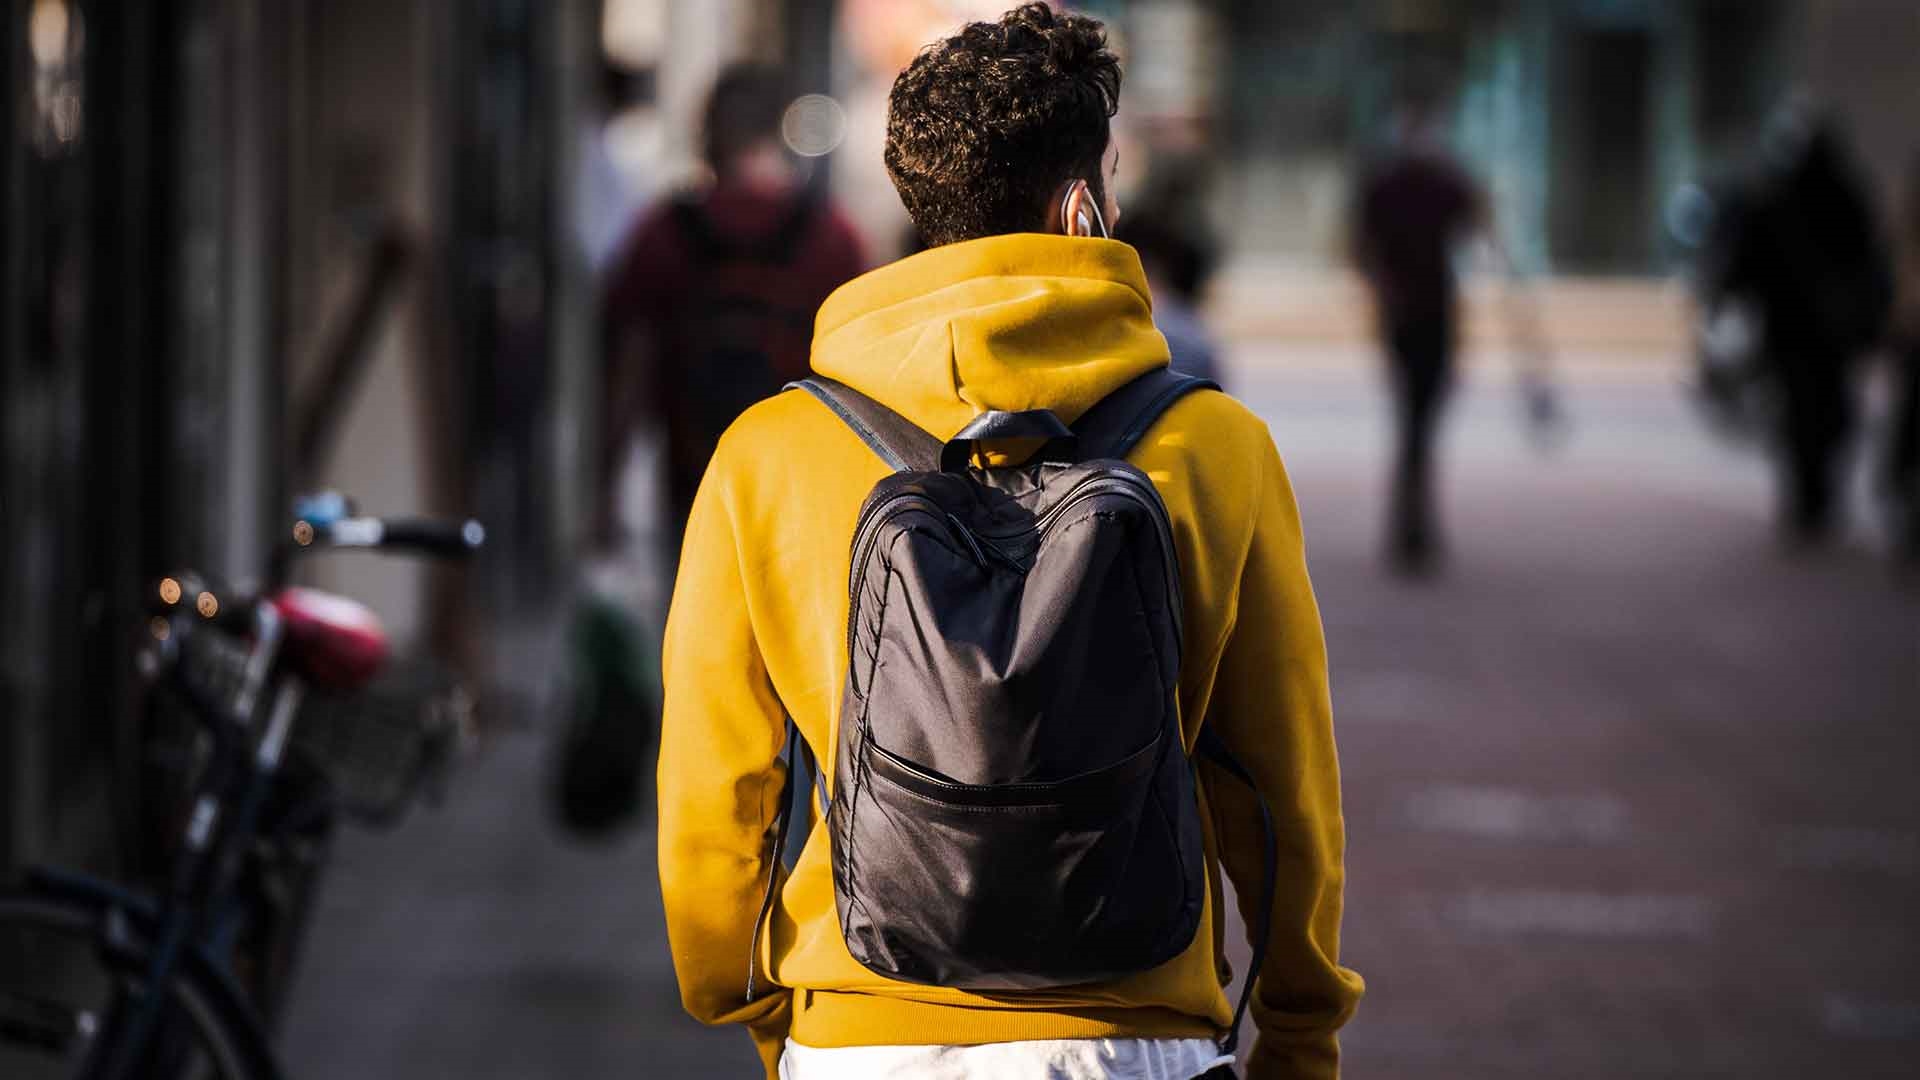 A person walking in the street wearing a yellow sweater and a black backpack